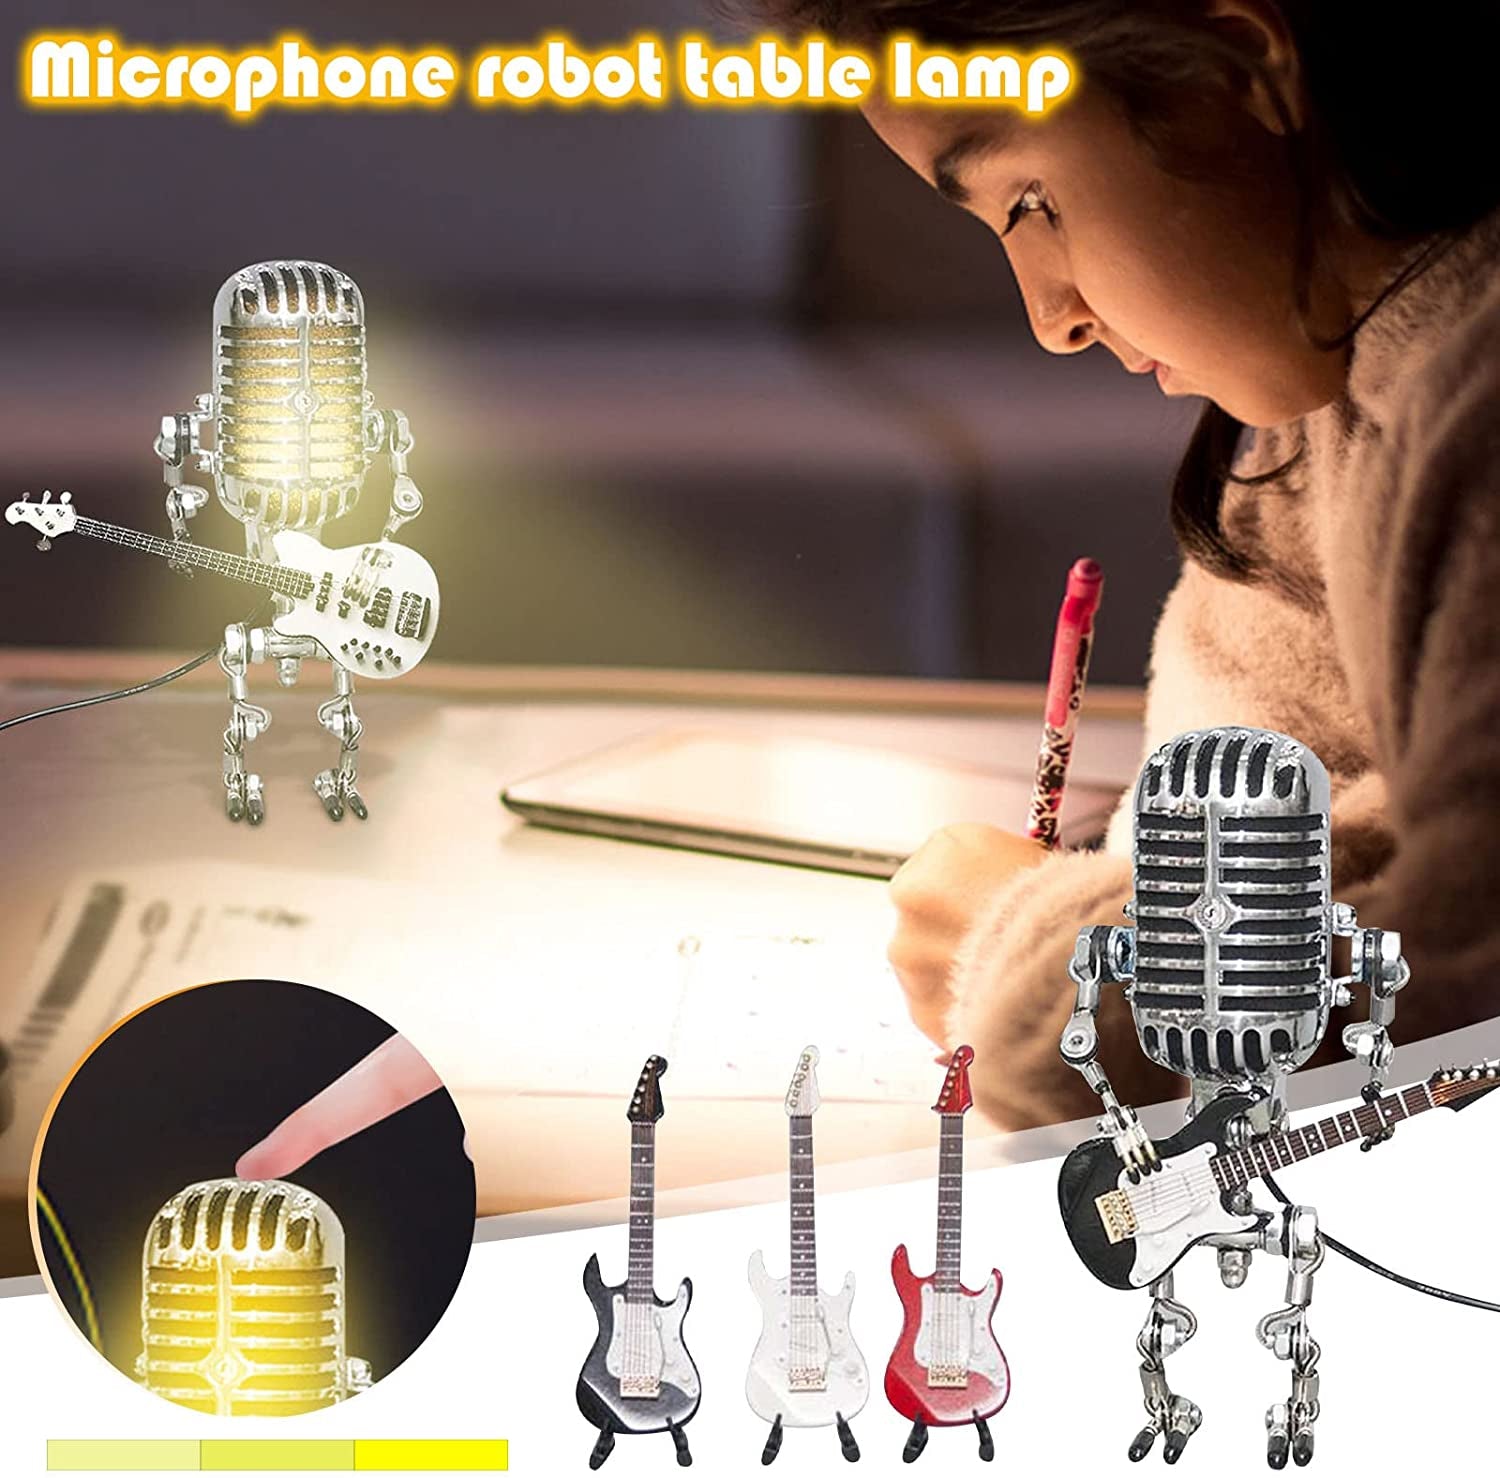 Vintage Microphone Robot Desk Lamp,Metal Microphone Robot Lamp with Mini Guitar,Robot Touch Dimmer Lamp,Vintage Light Home Decor Nightstand Desk Lamp for Home Bedroom,Bar, Office